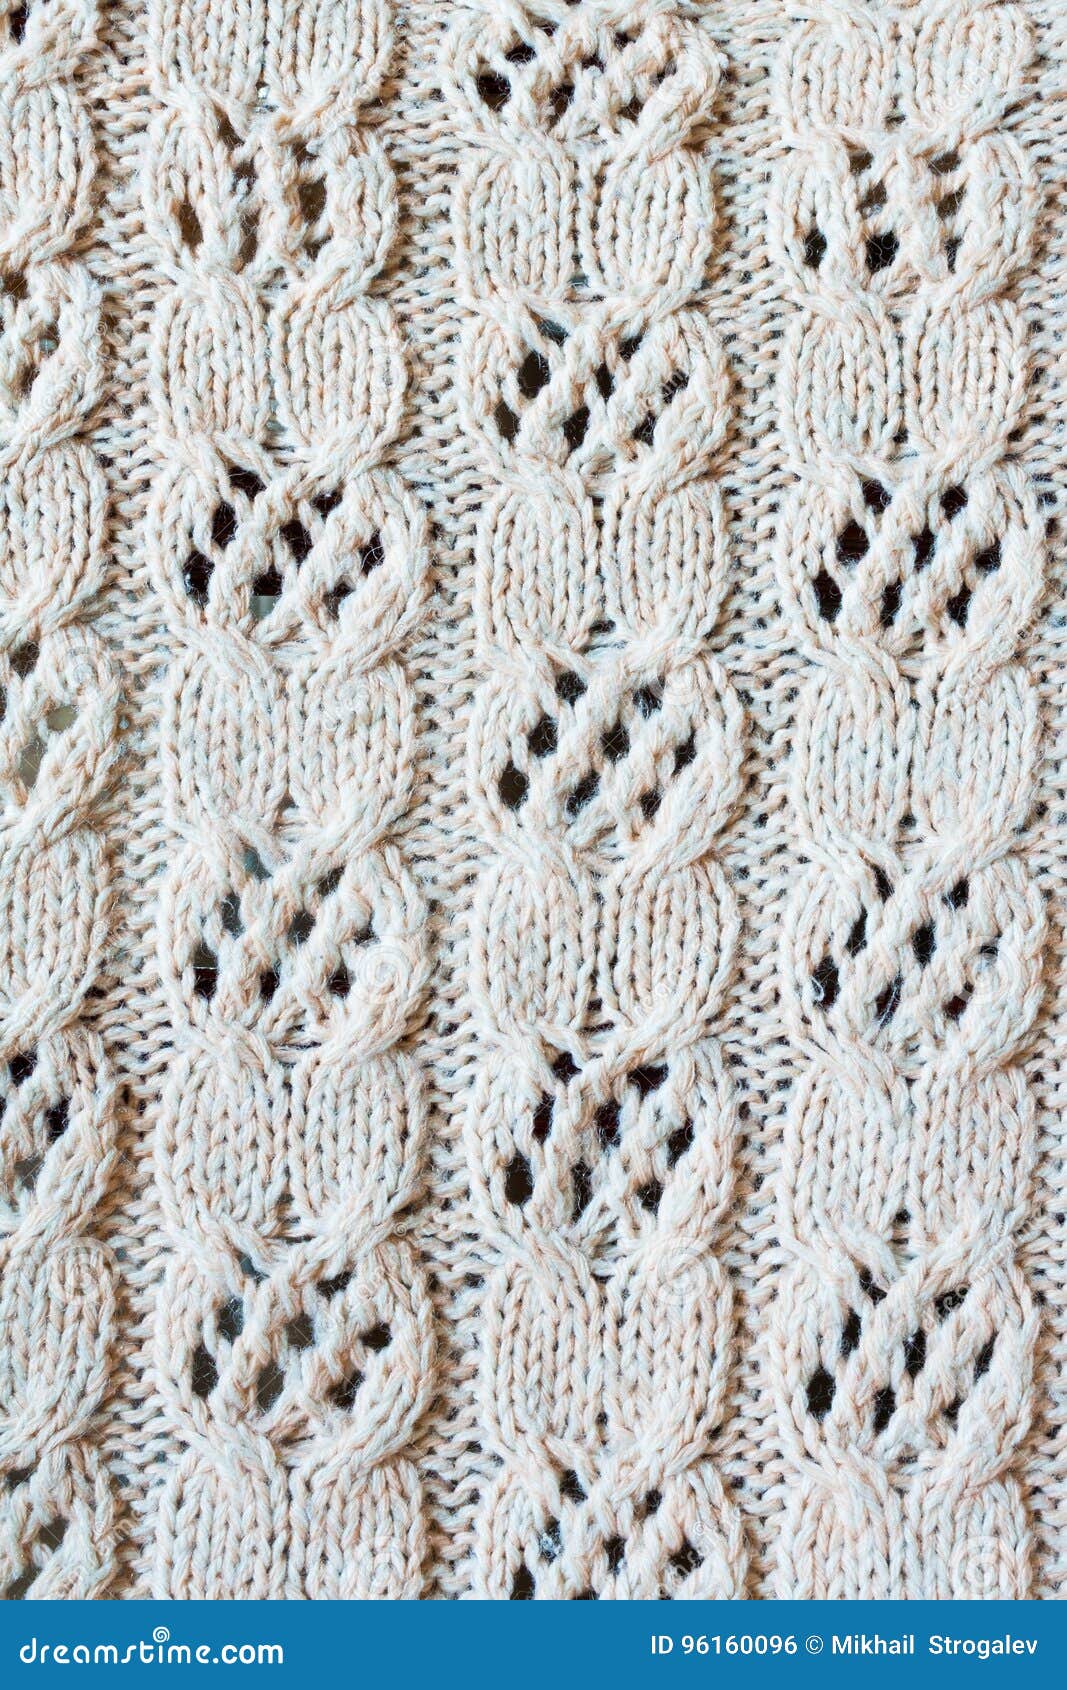 Knitted From The Wool With An Openwork Pattern Background